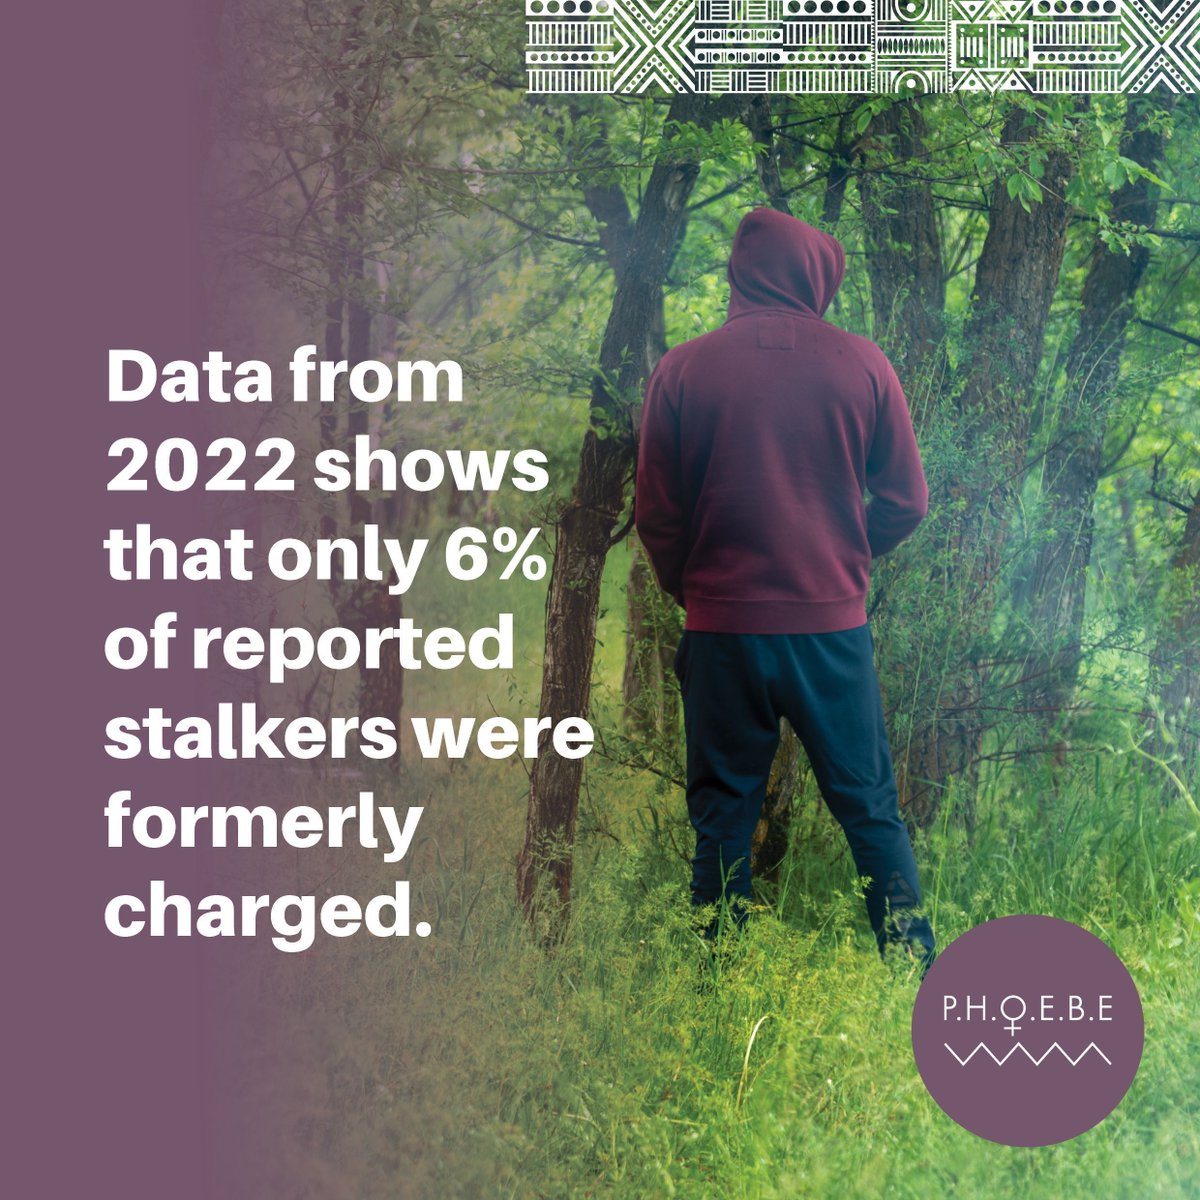 More must be done to protect stalking victims, this harmful act can lead to serious harm or even death
#StalkingAwarenessWeek #JoinForcesAgainstSalking